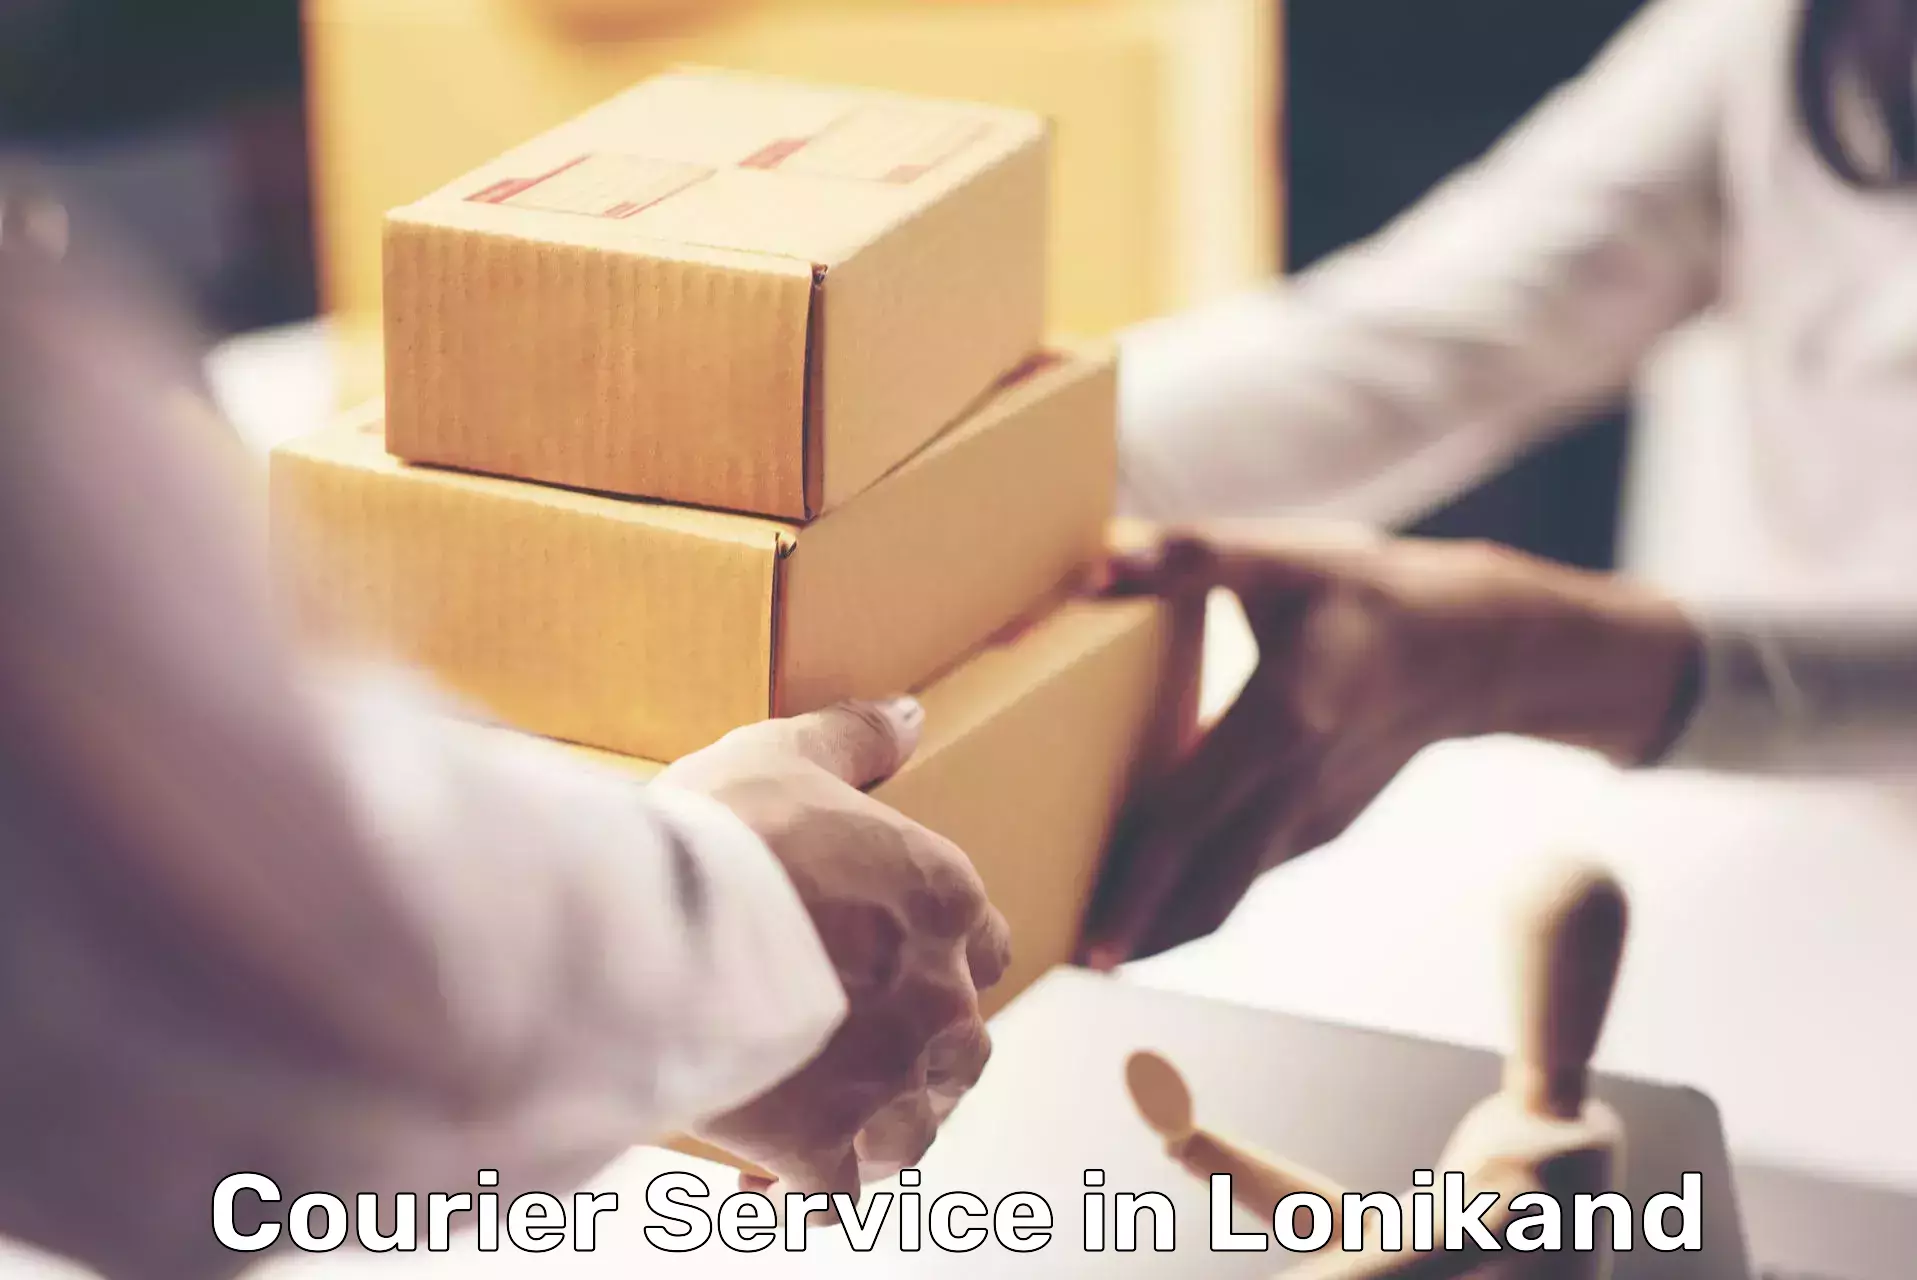 Reliable shipping partners in Lonikand